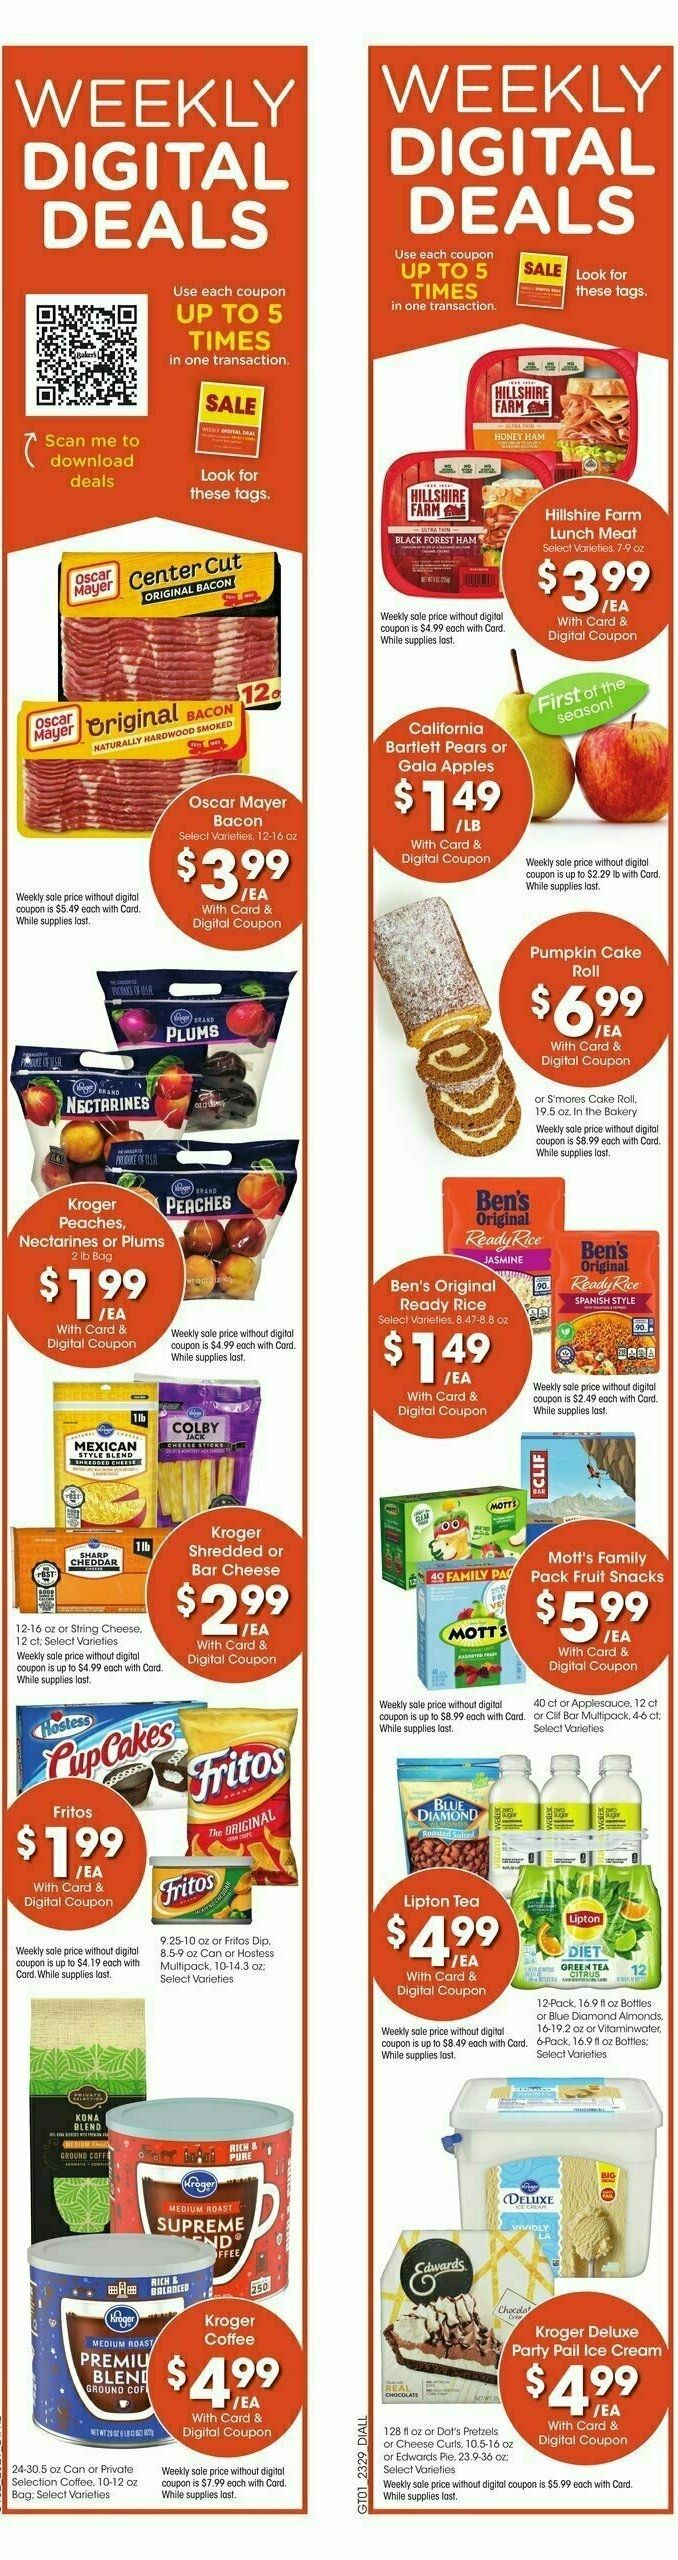 Baker's Weekly Ad from August 16